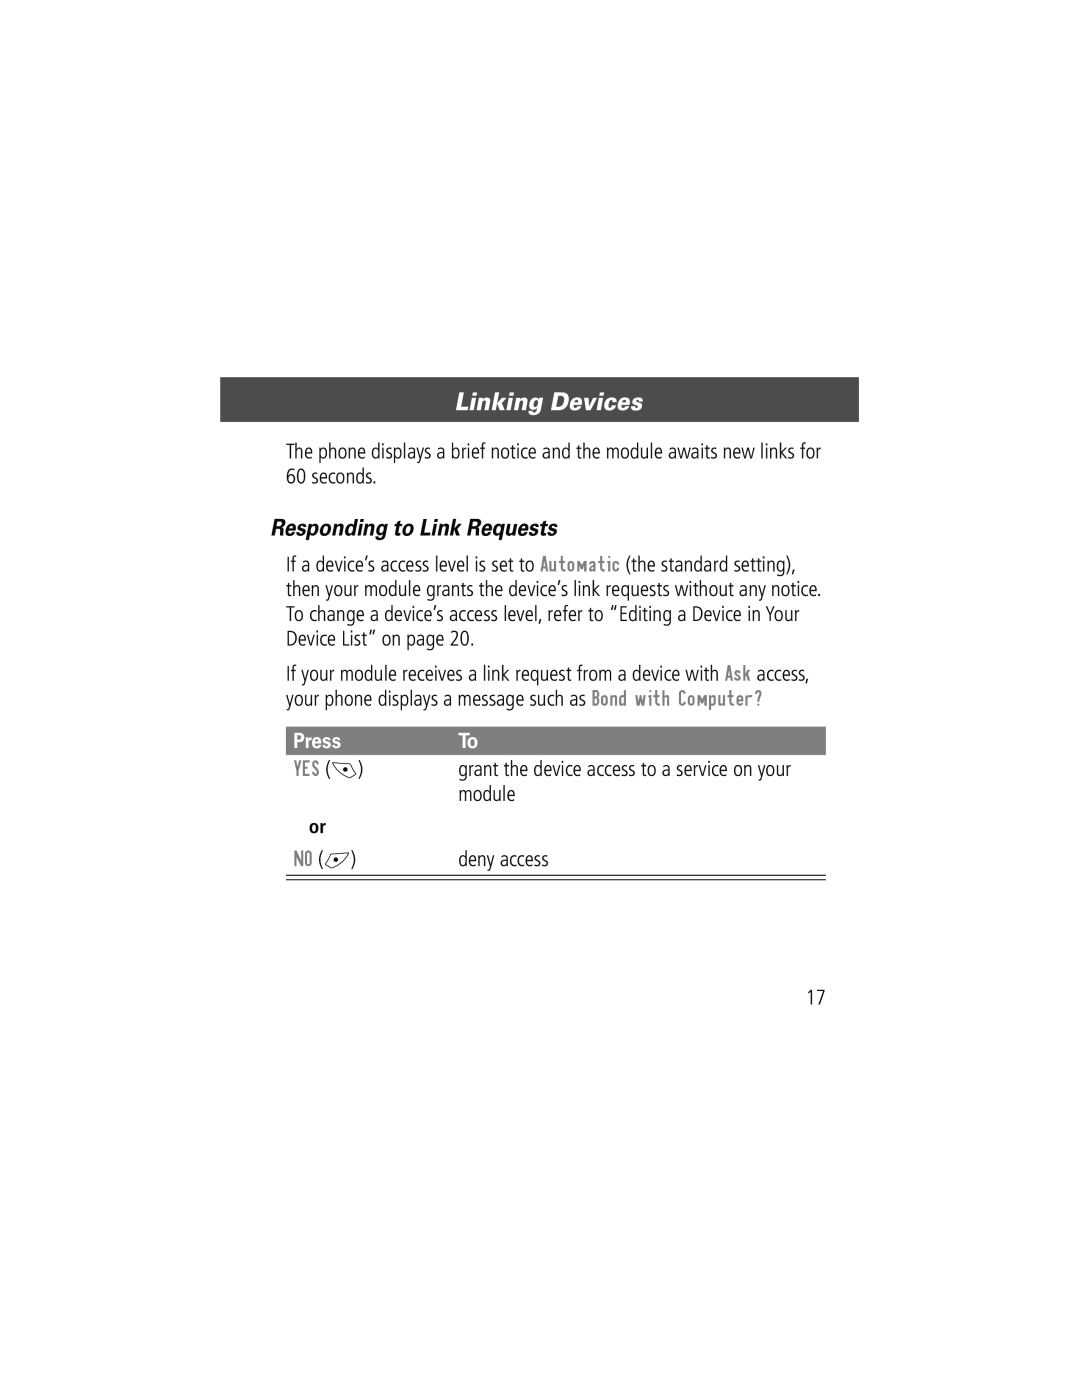 Motorola Bluetooth Module manual Responding to Link Requests, Linking Devices, Press 